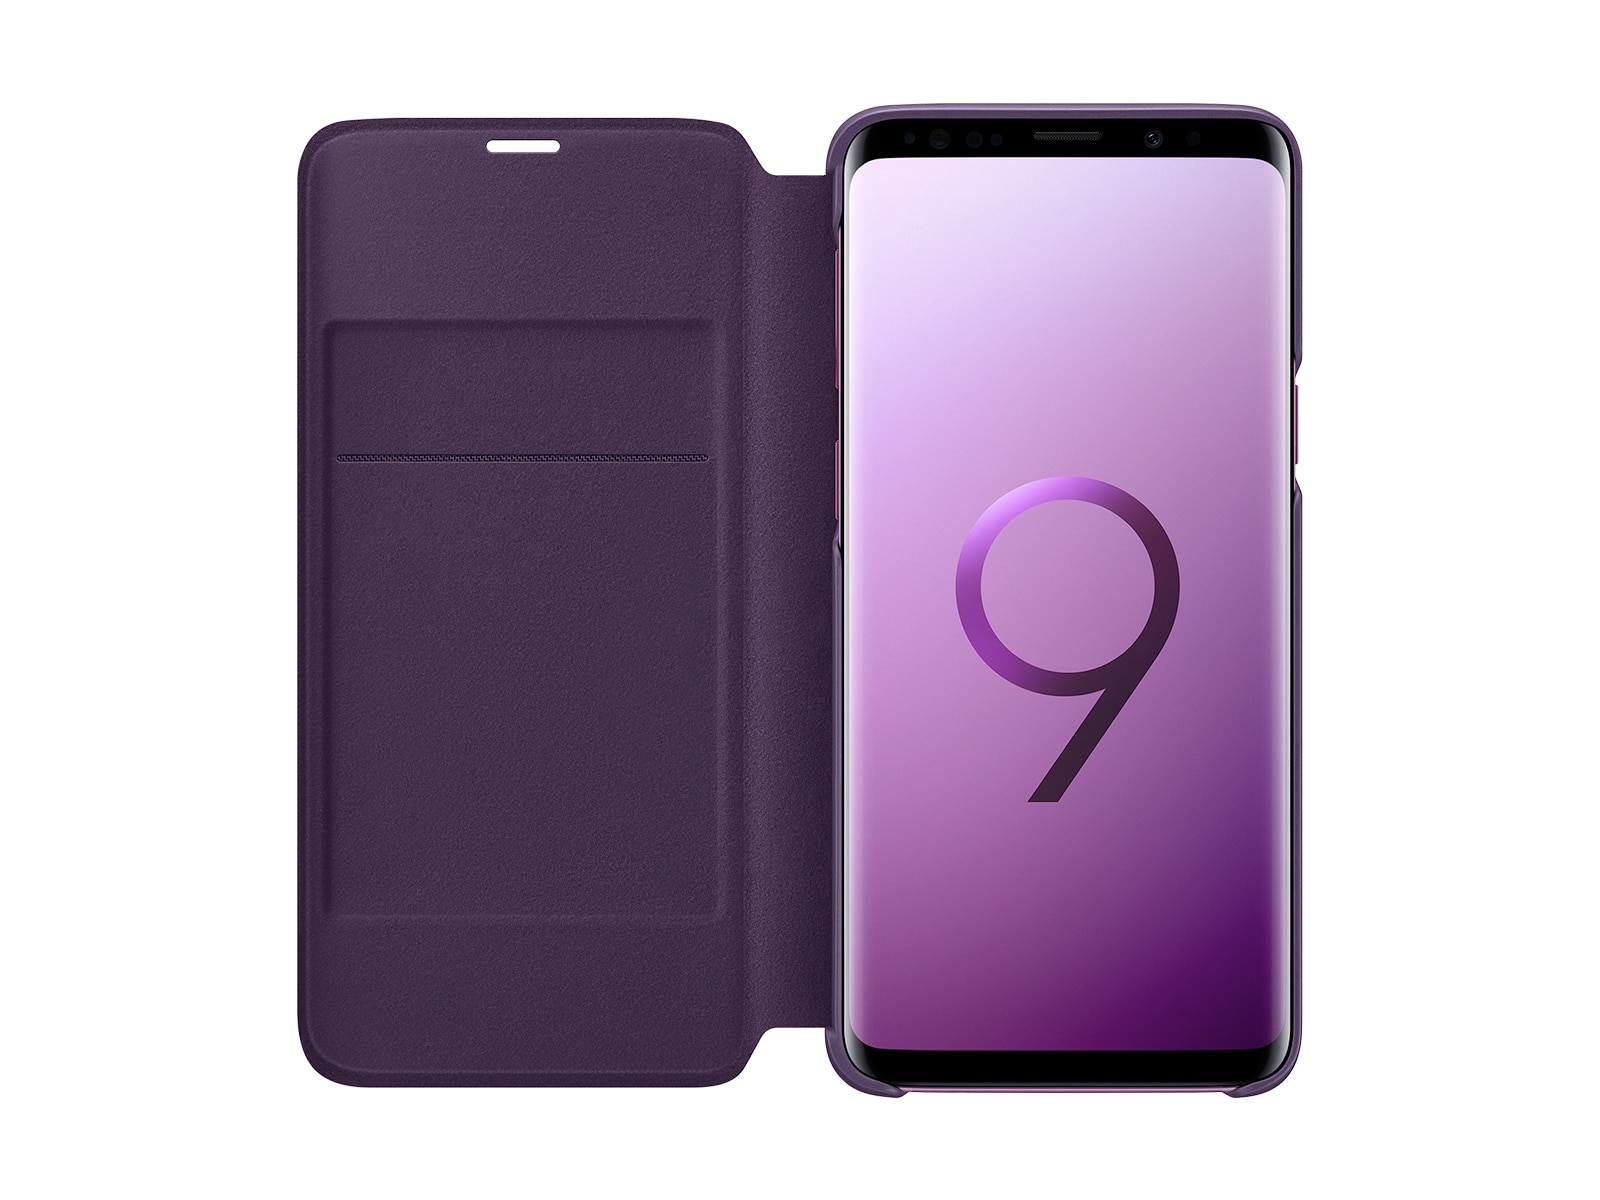 Galaxy S9 LED Cover, Violet Mobile - EF-NG960PVEGUS US